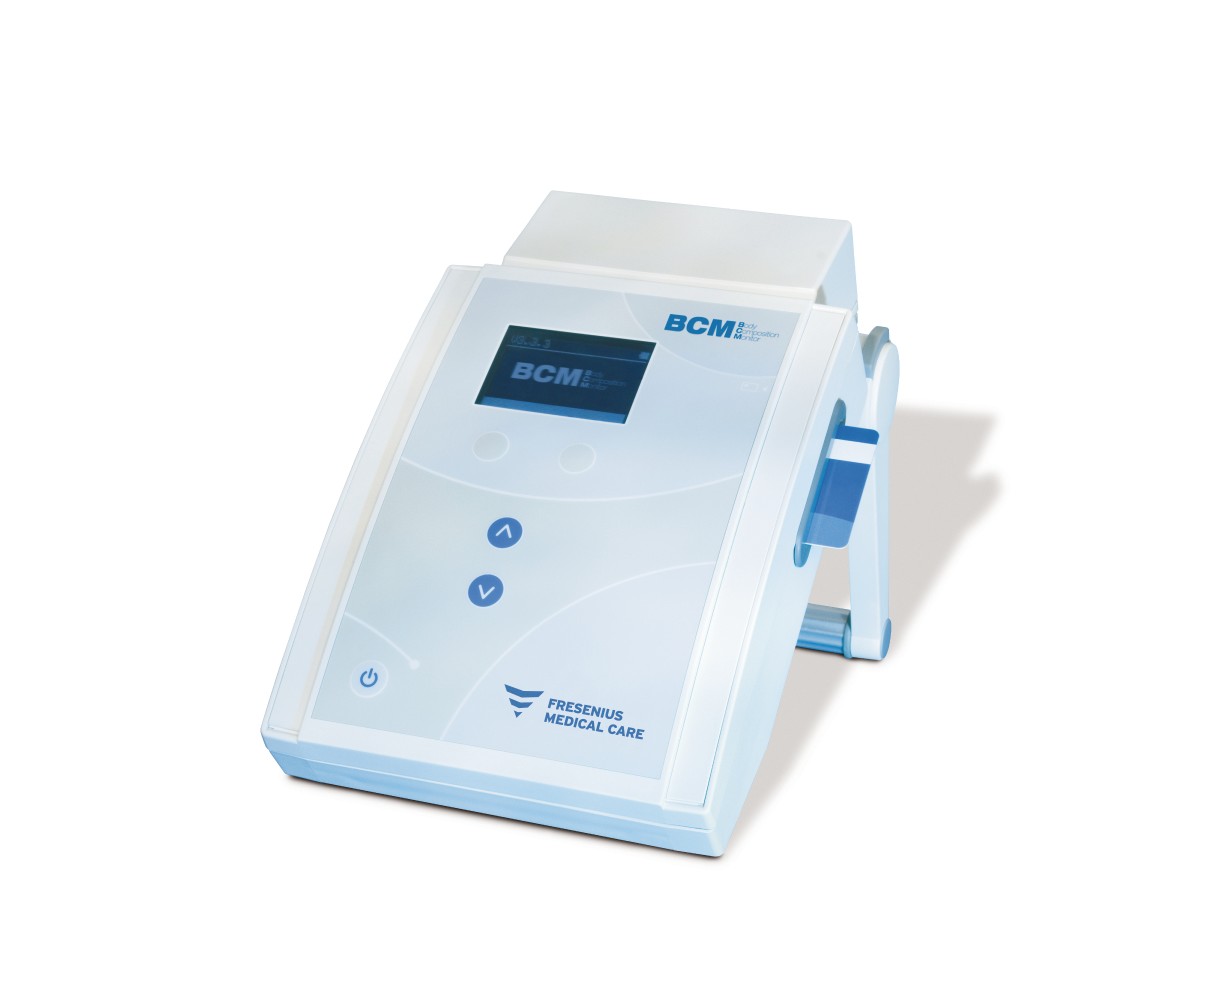 Body Composition Monitor from Fresenius Medical Care